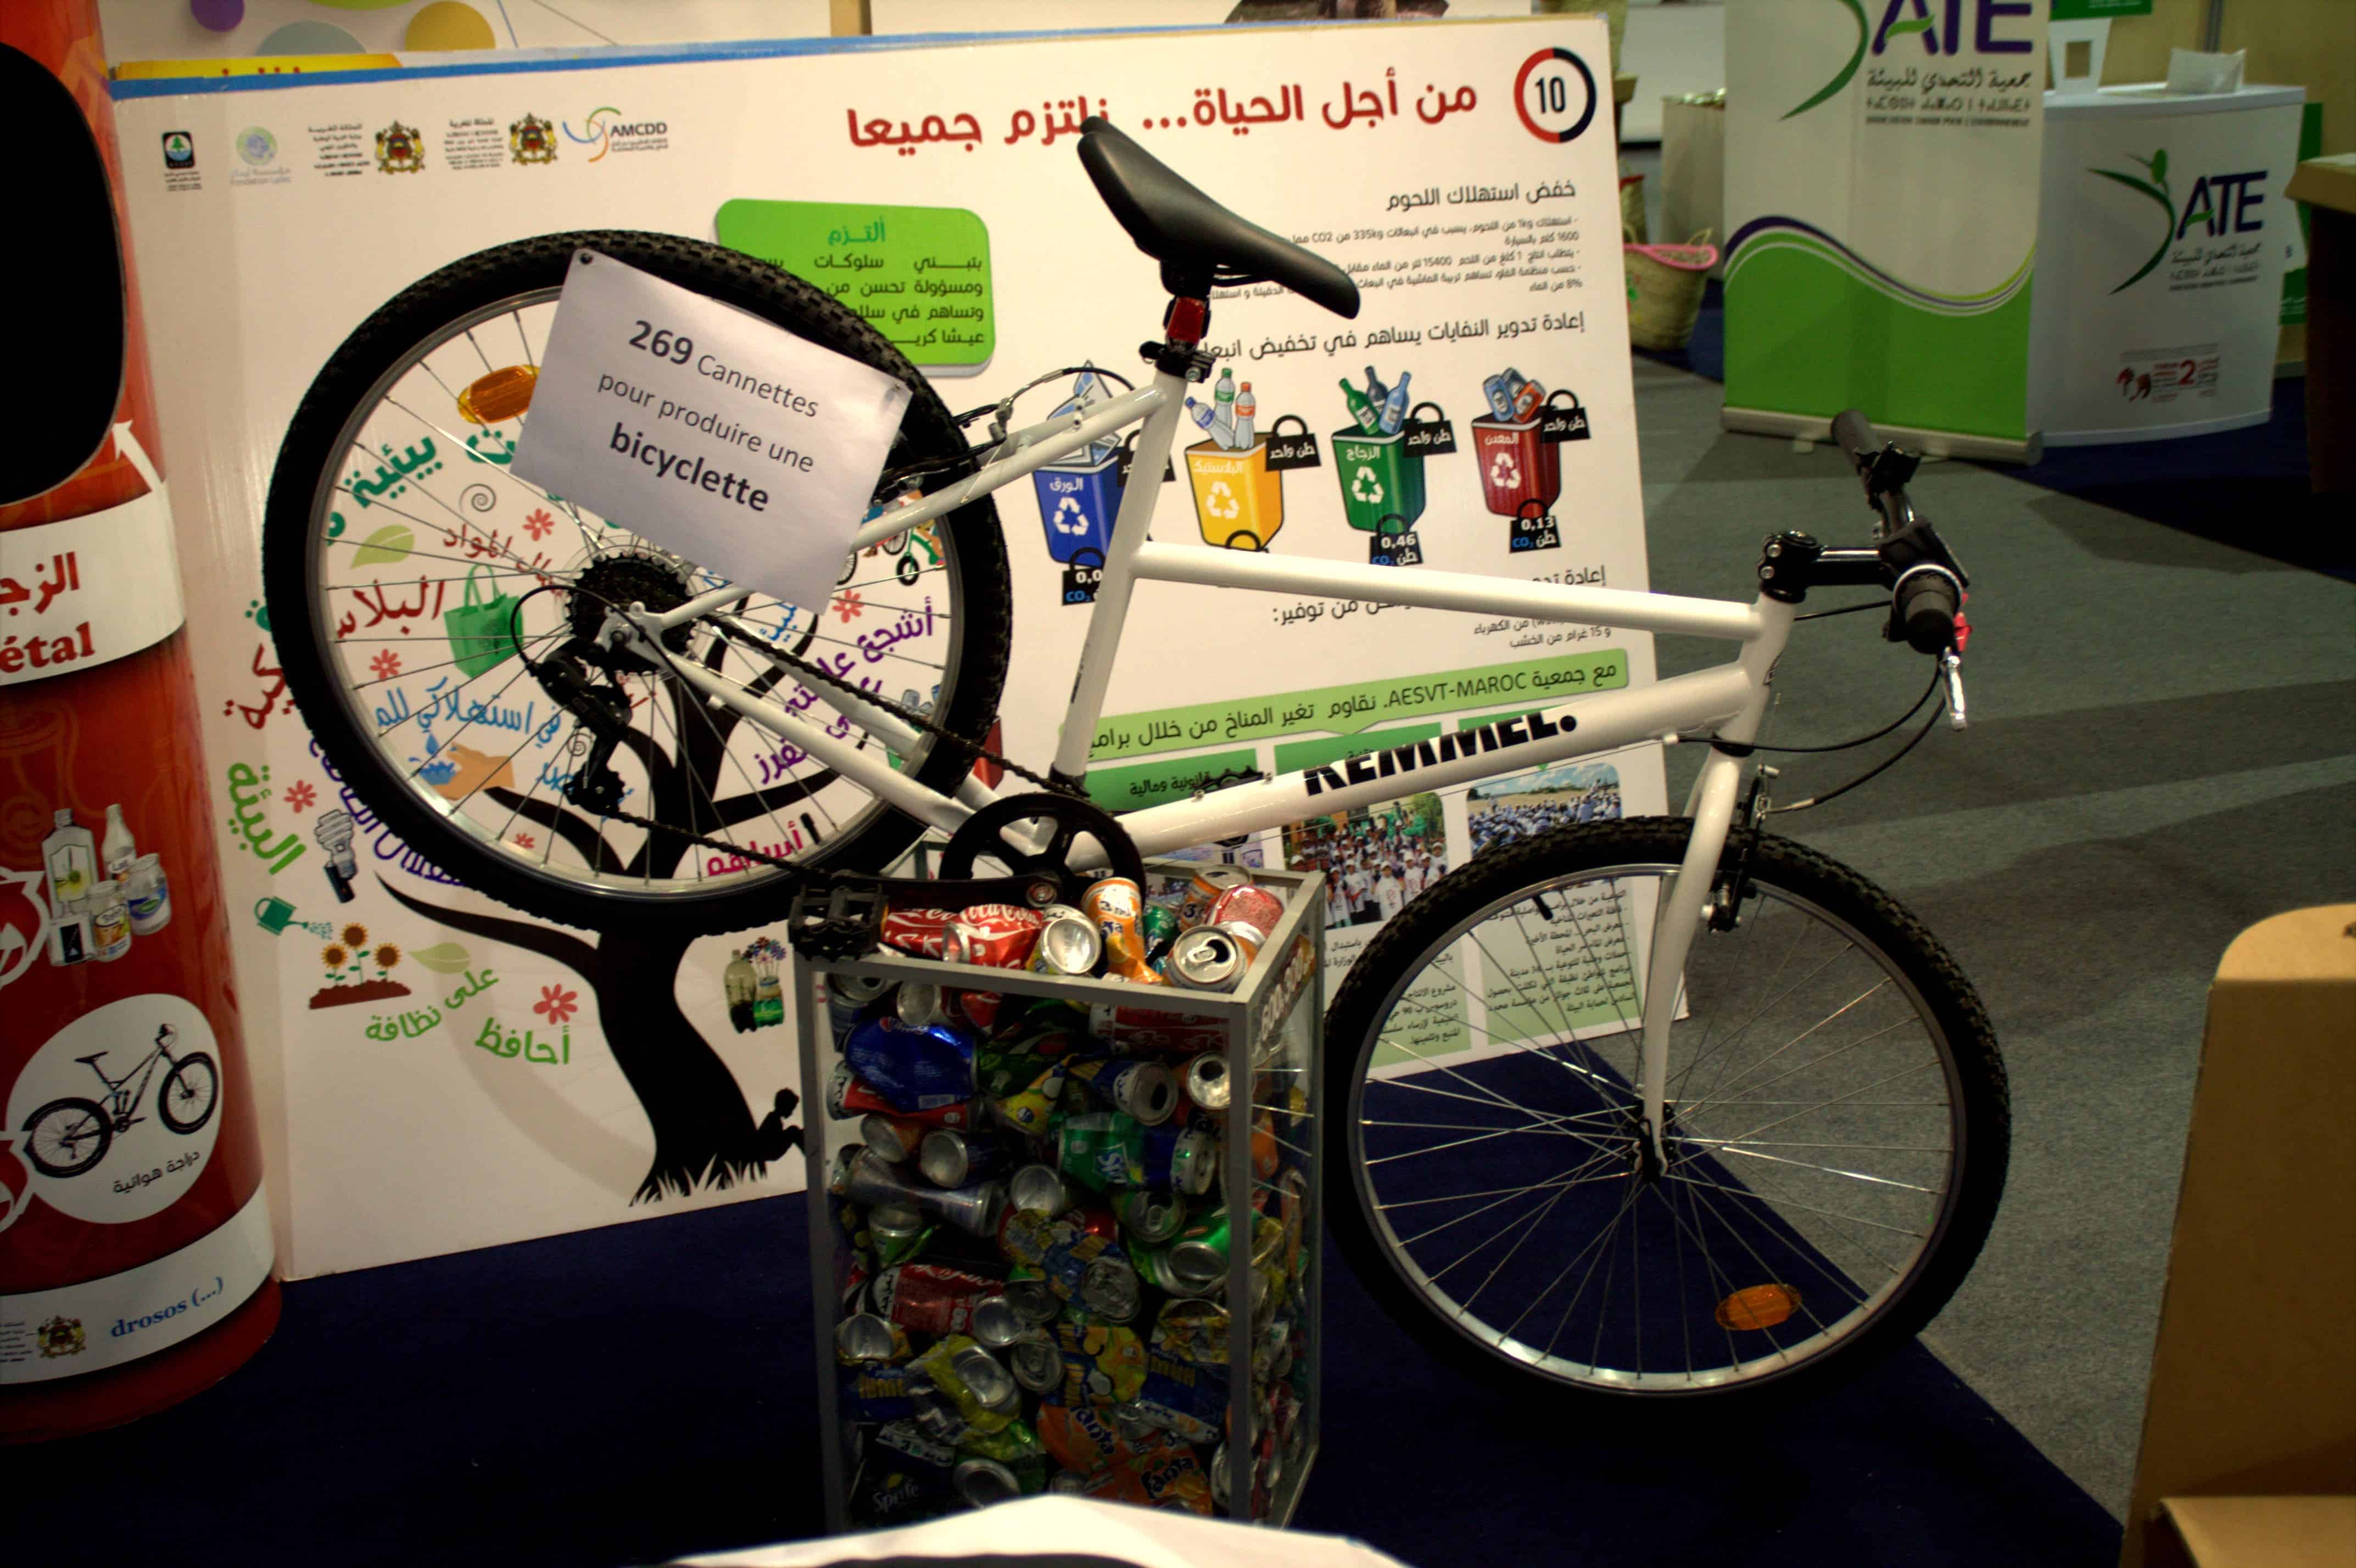 The pavilion also promotes recycling for a more sustainable lifestyle.